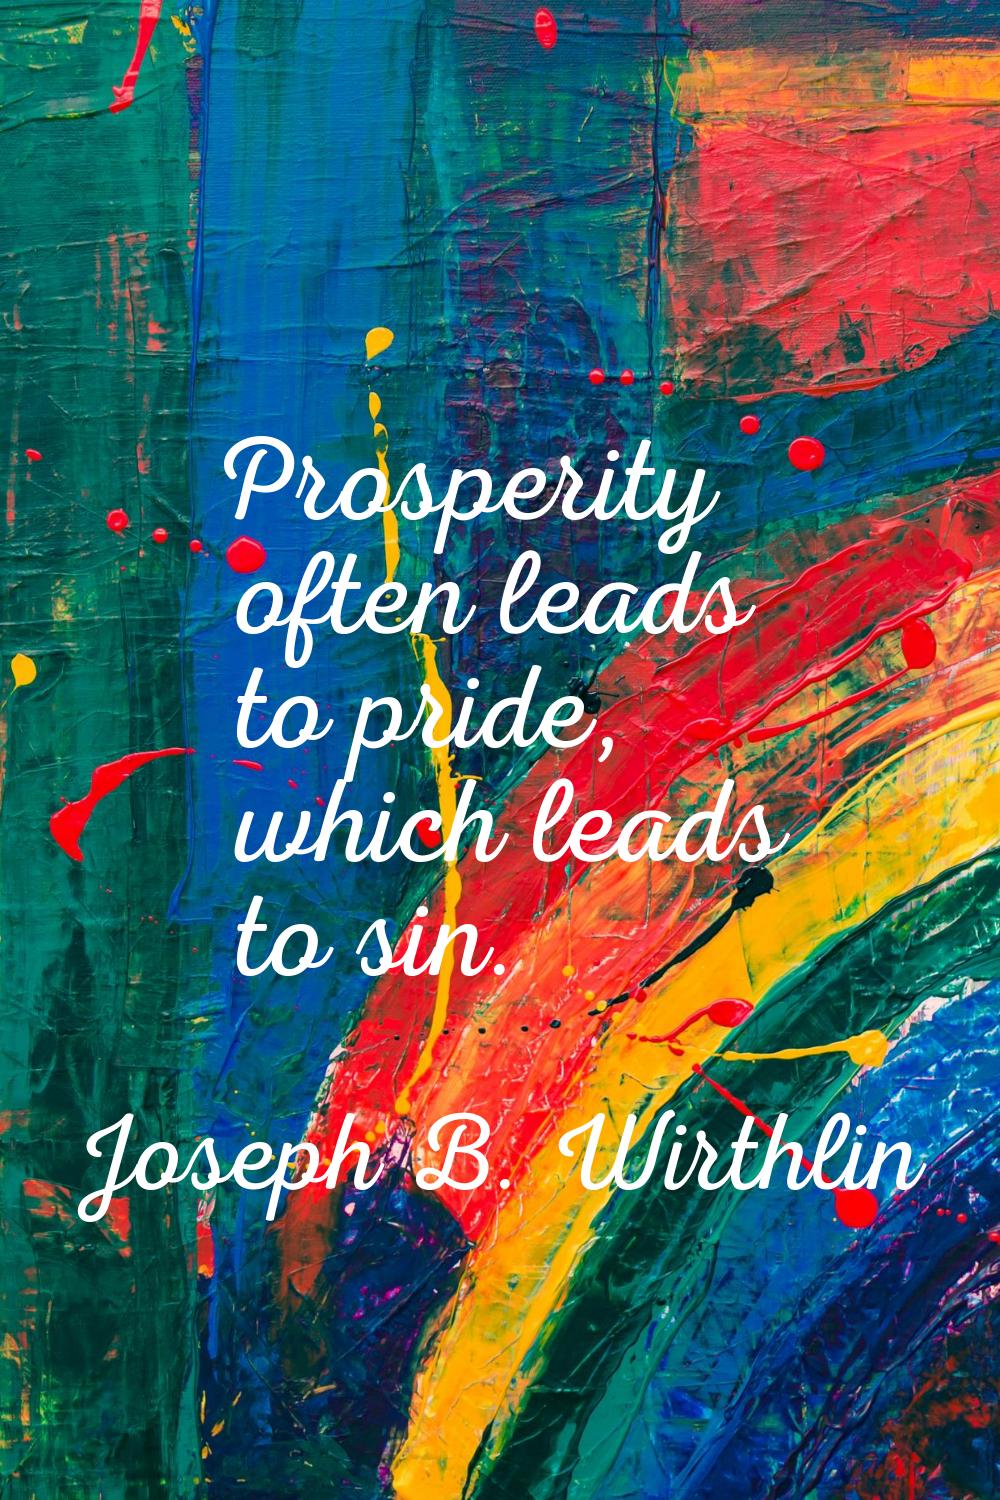 Prosperity often leads to pride, which leads to sin.